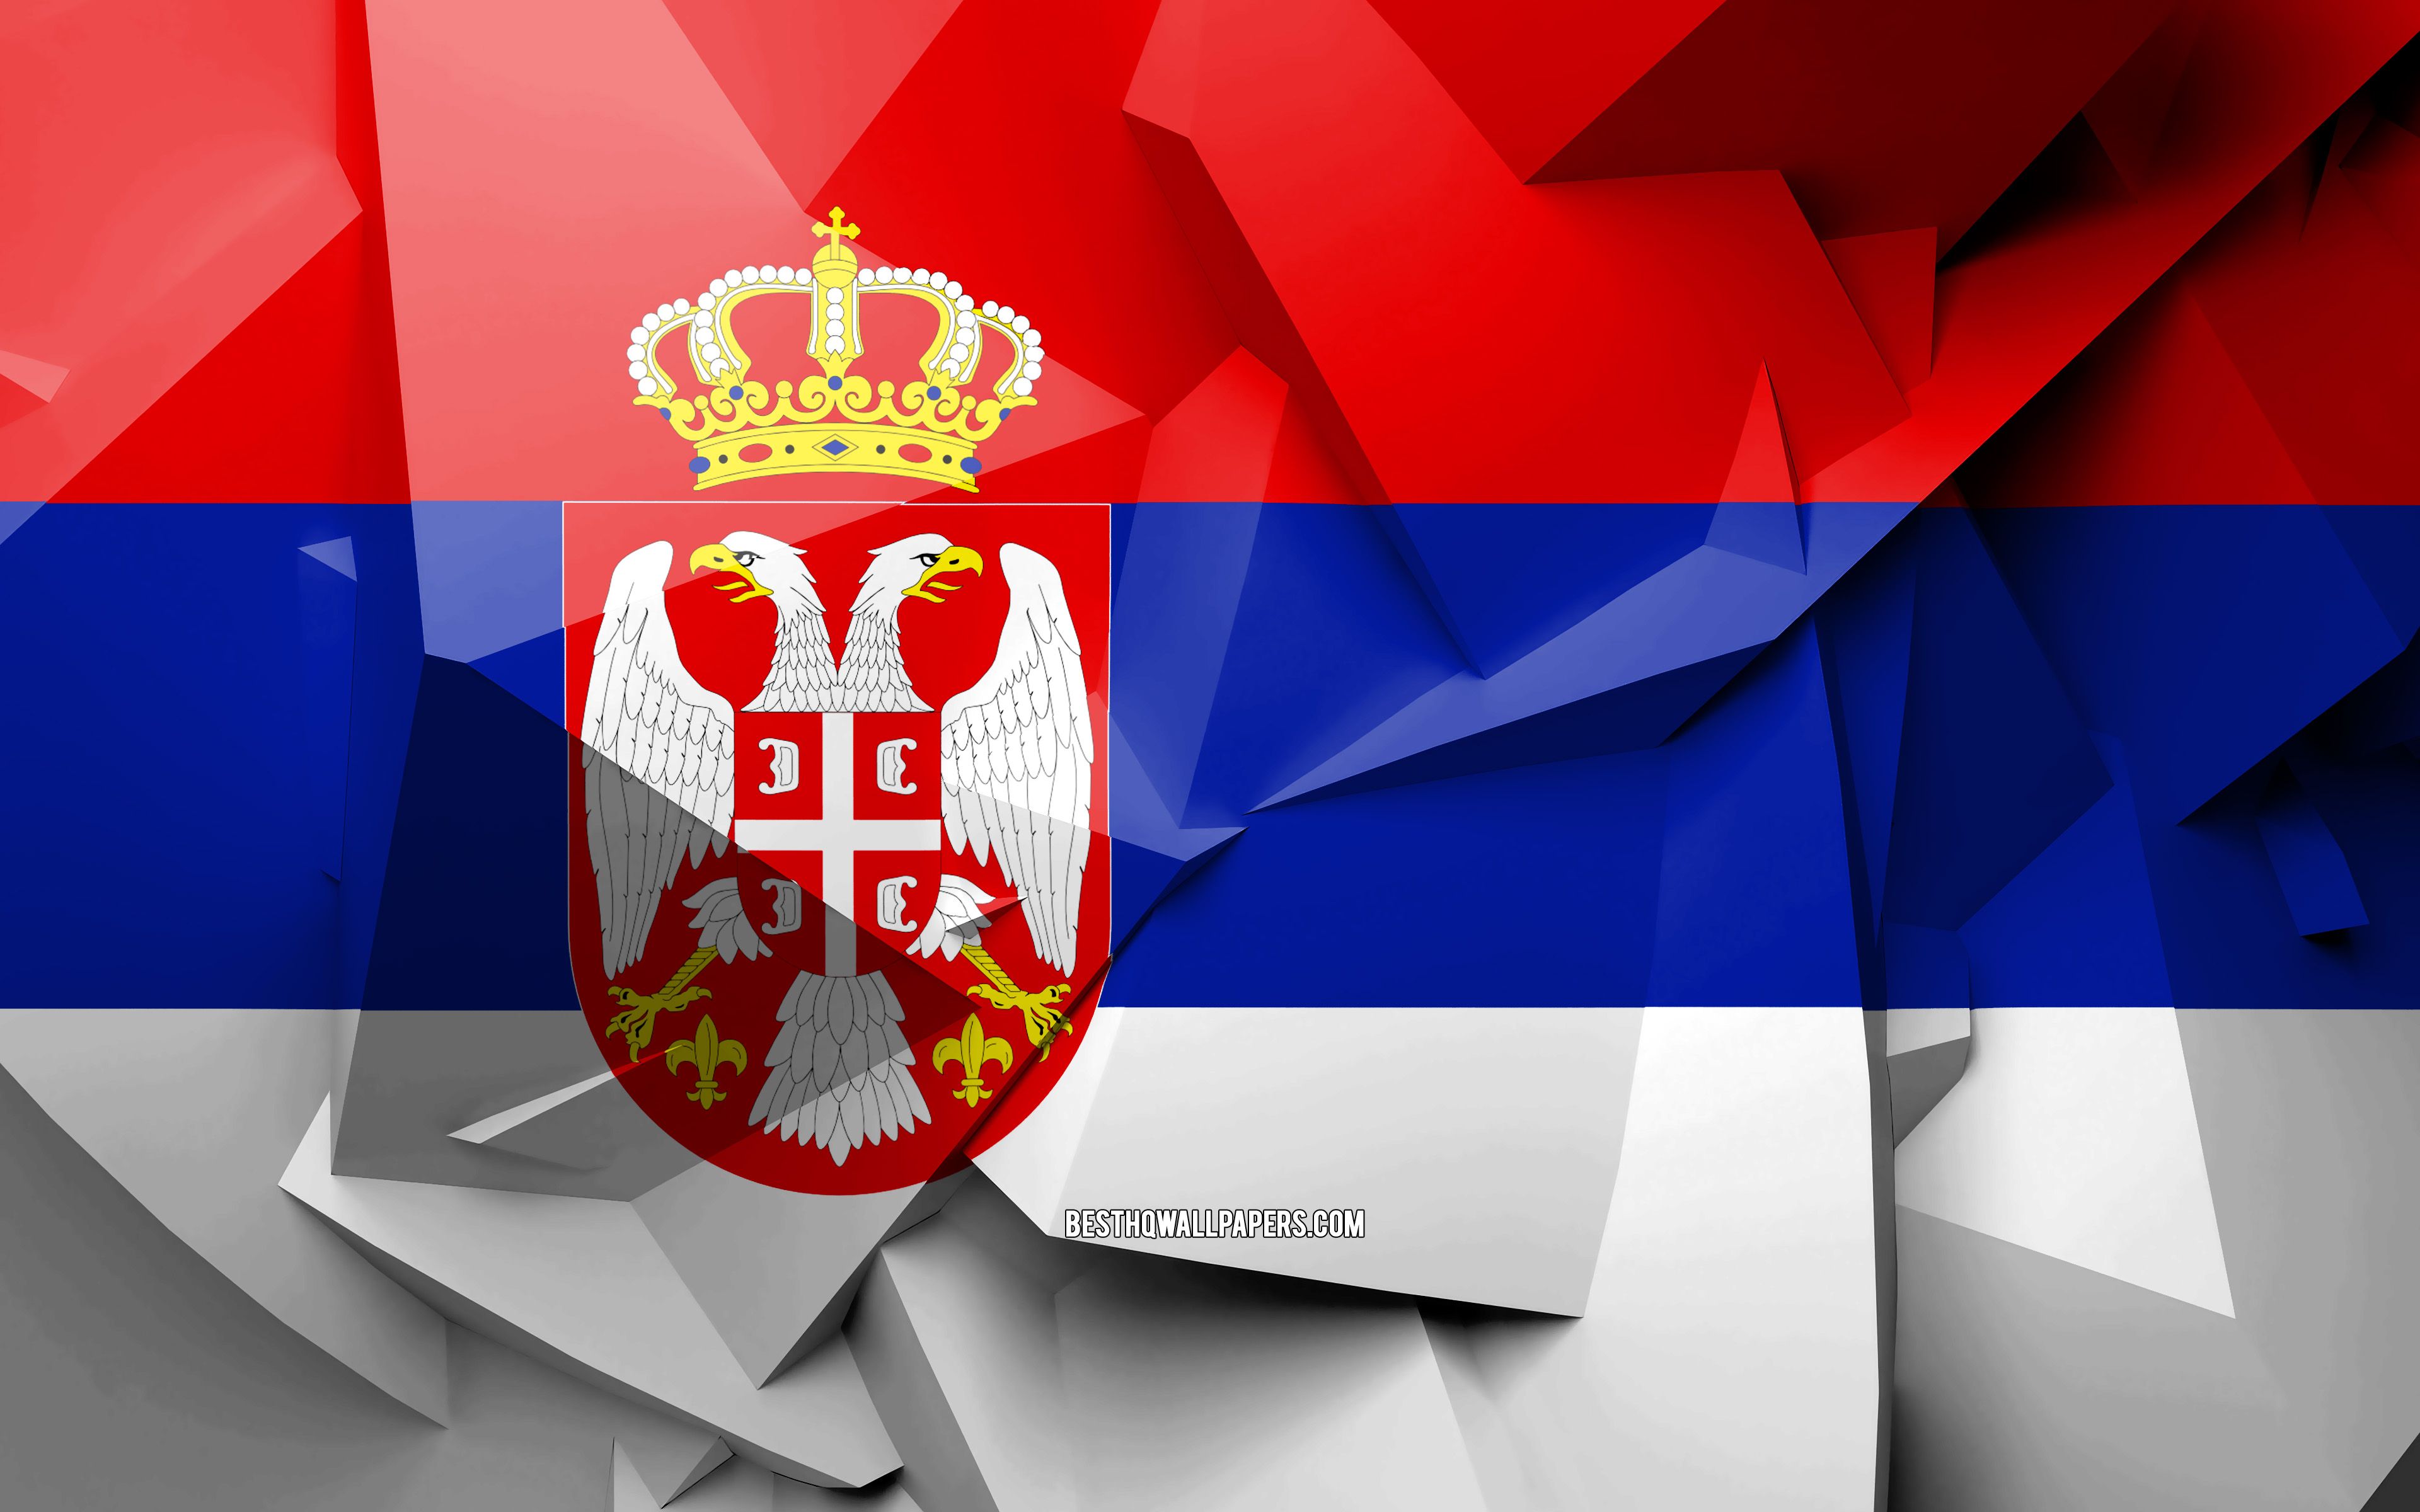 Download wallpaper 4k, Flag of Serbia, geometric art, European countries, Serbian flag, creative, Serbia, Europe, Serbia 3D flag, national symbols for desktop with resolution 3840x2400. High Quality HD picture wallpaper